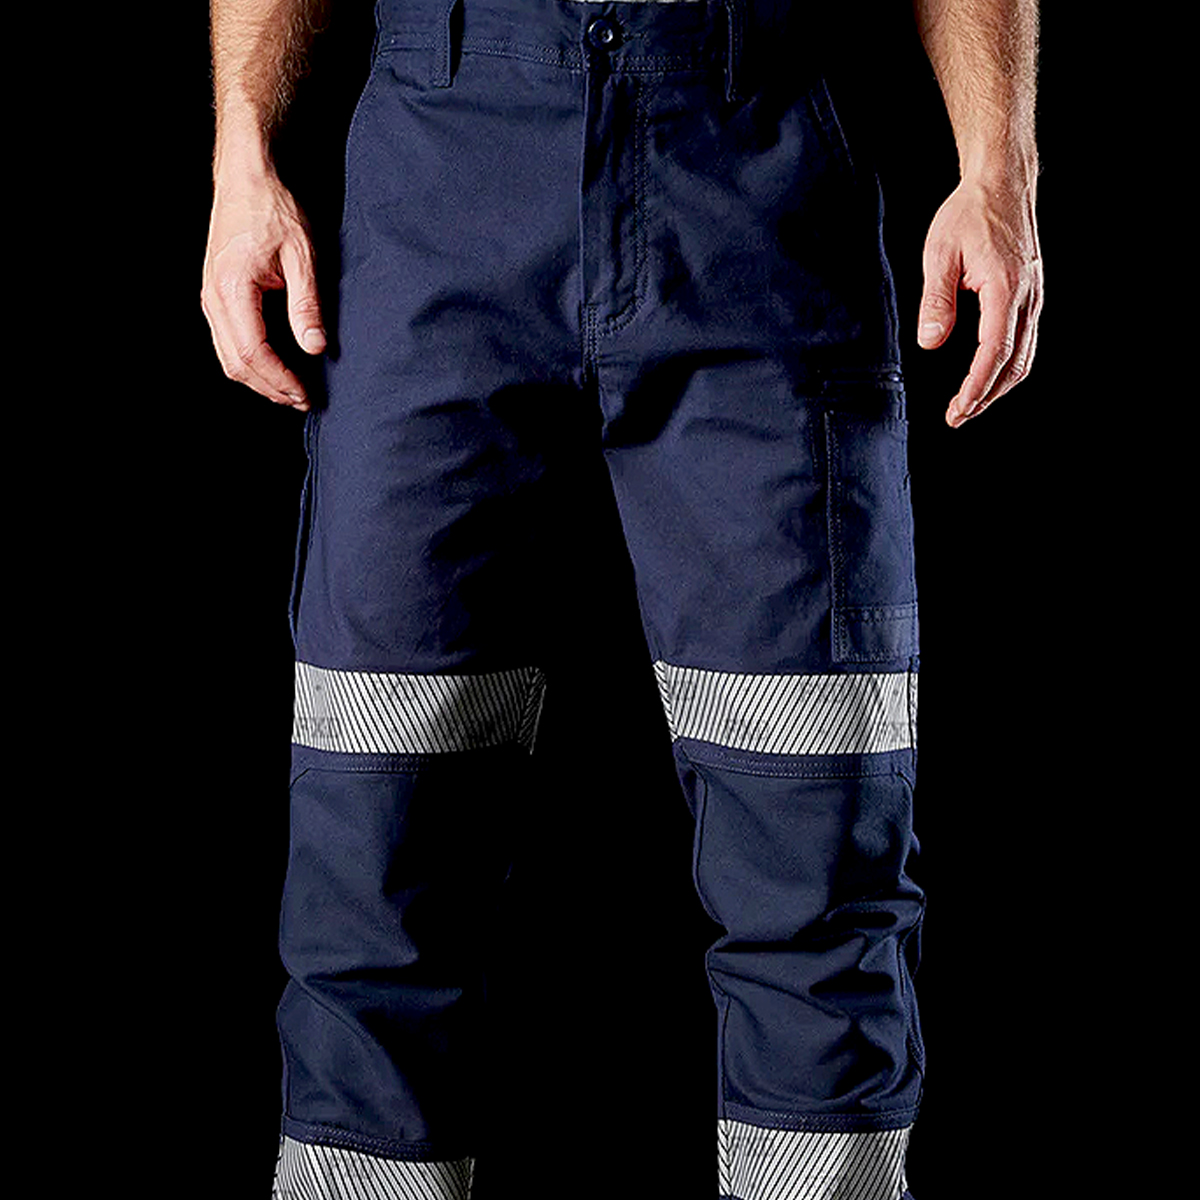 FXD Taped Stretch Cuffed Pant WP-4T - The Workers Shop